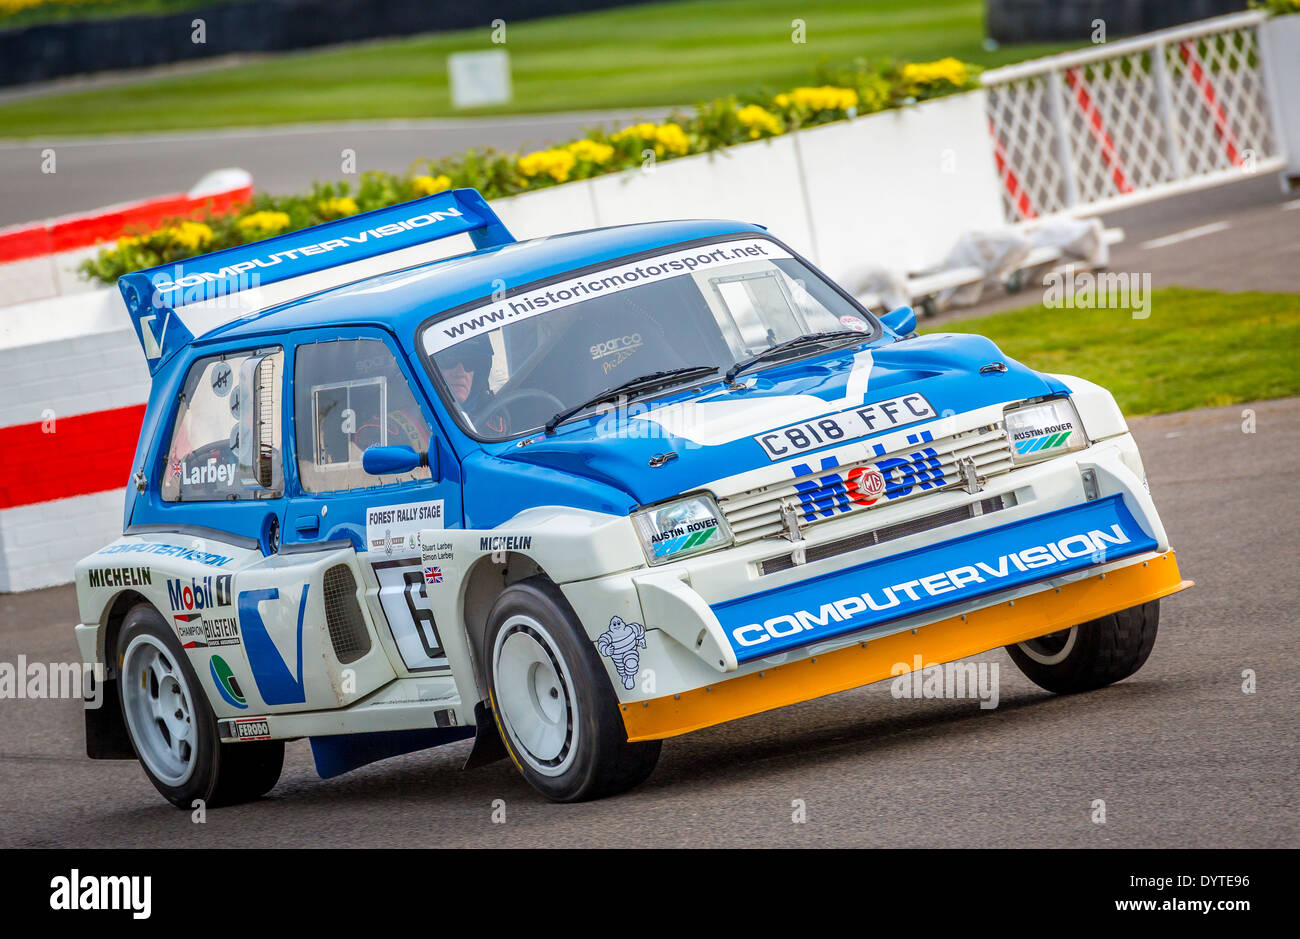 1986 Metro MG 6R4 Group B car with driver Stuart Larby. 72nd Goodwood Members meeting, Sussex, UK. Stock Photo